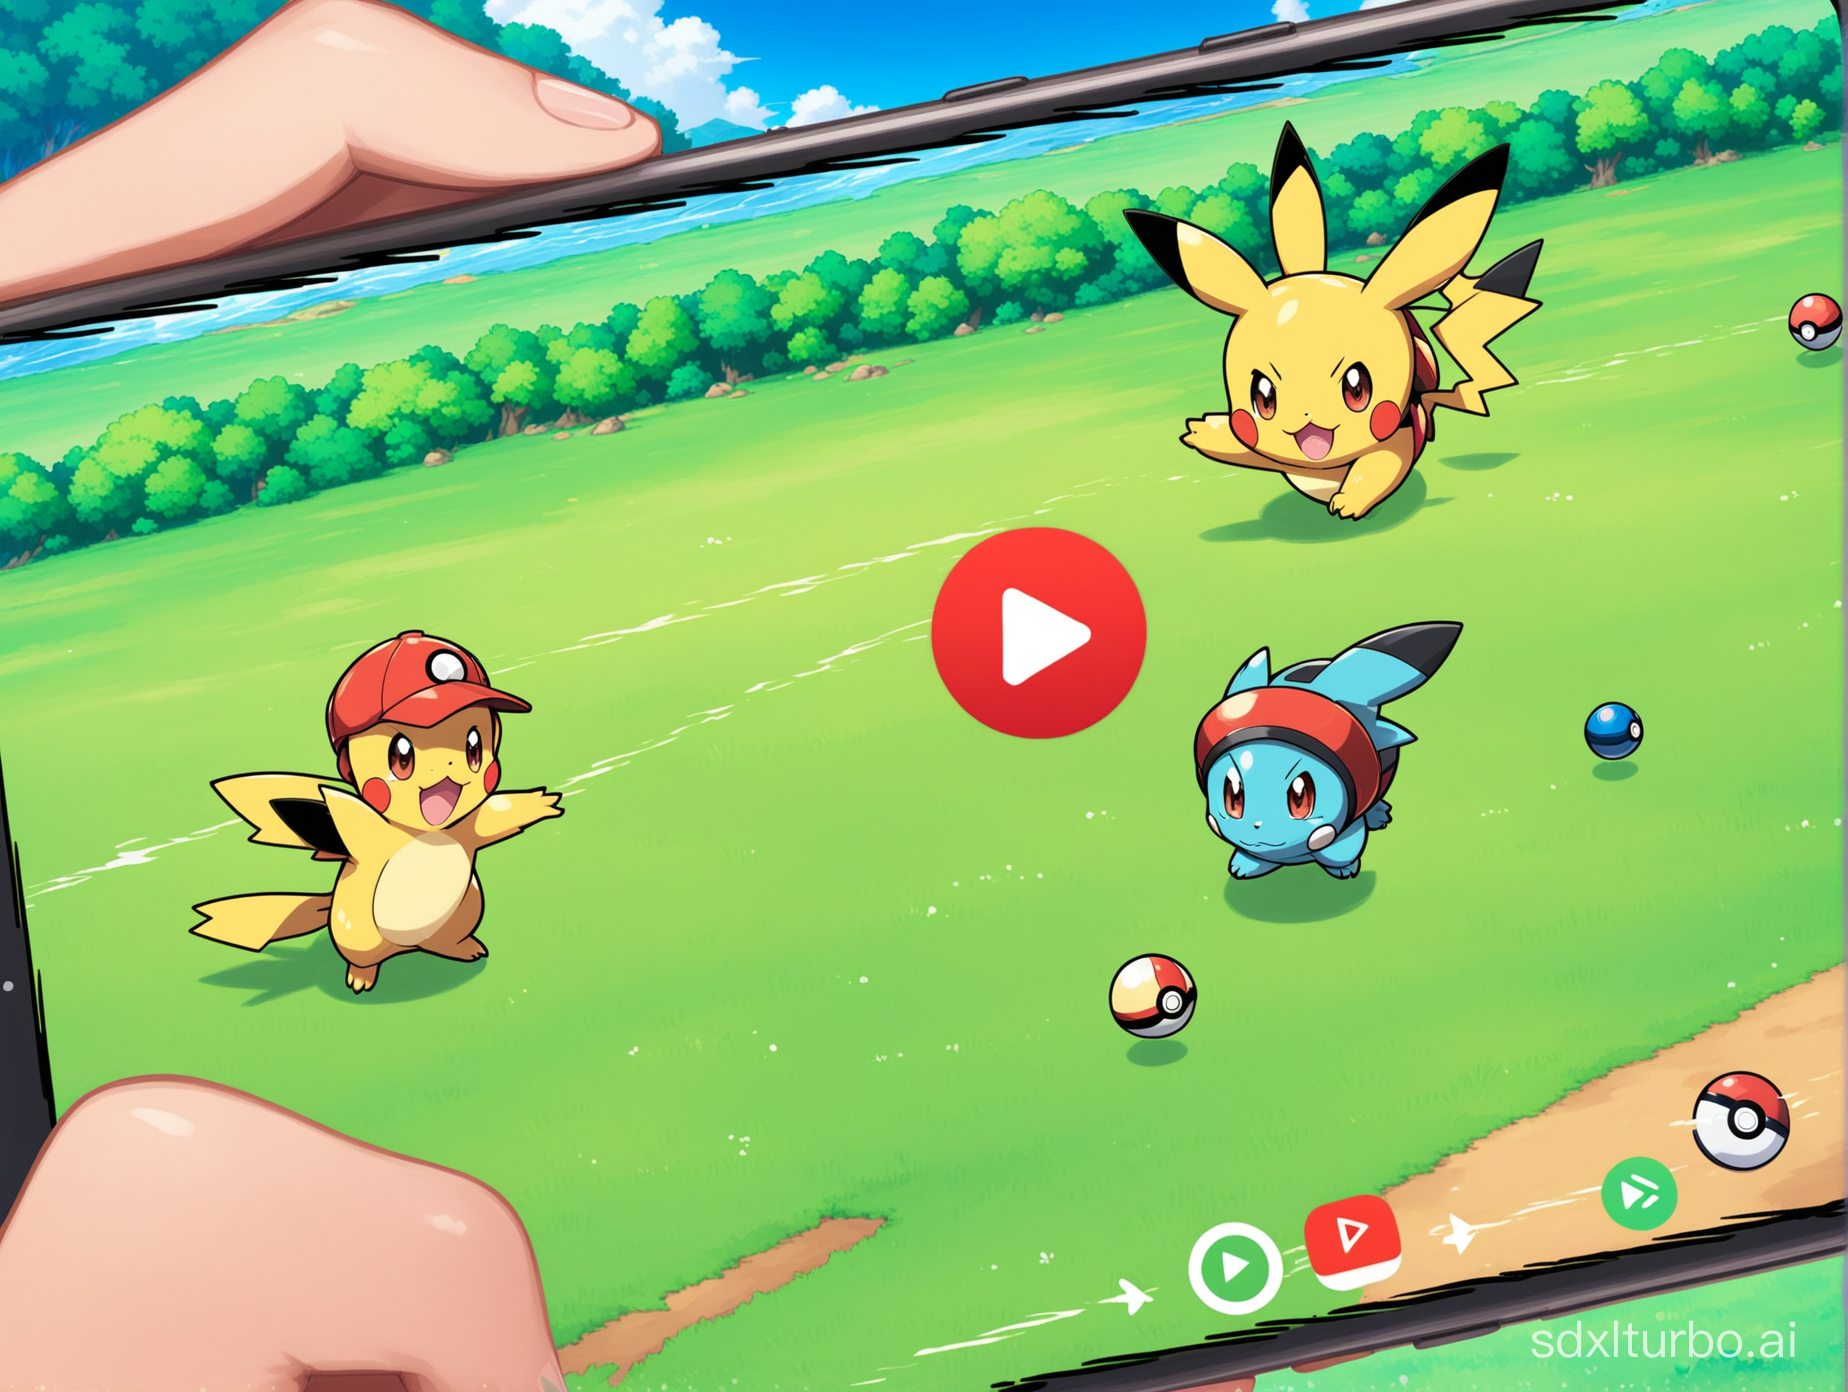 Attractive thumbnail of Pokemon catching game 
for YouTube